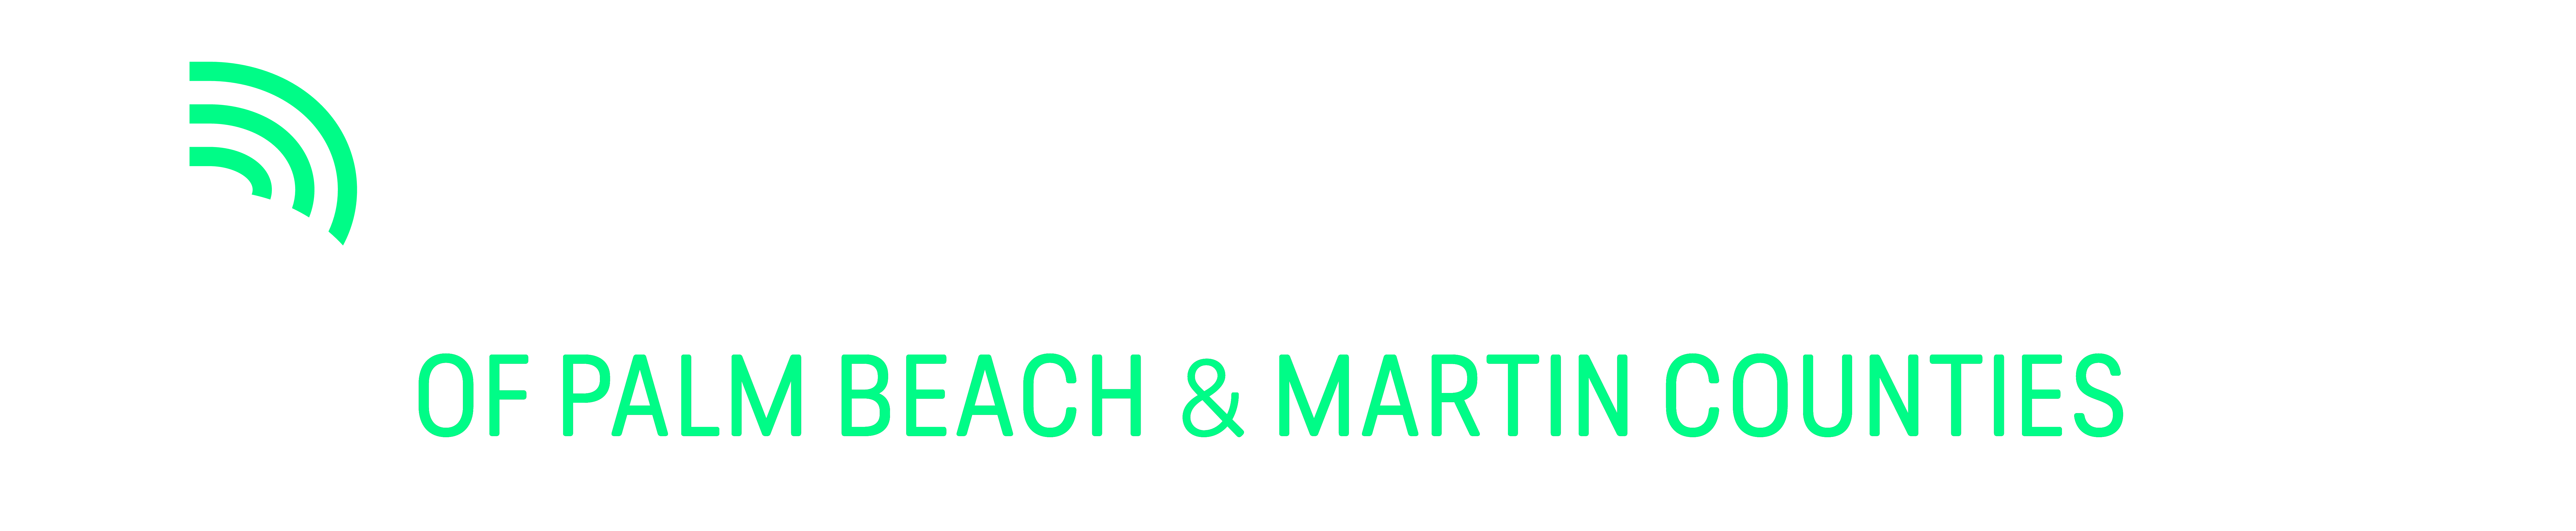 Big Brothers Big Sisters of Palm Beach and Martin Counties